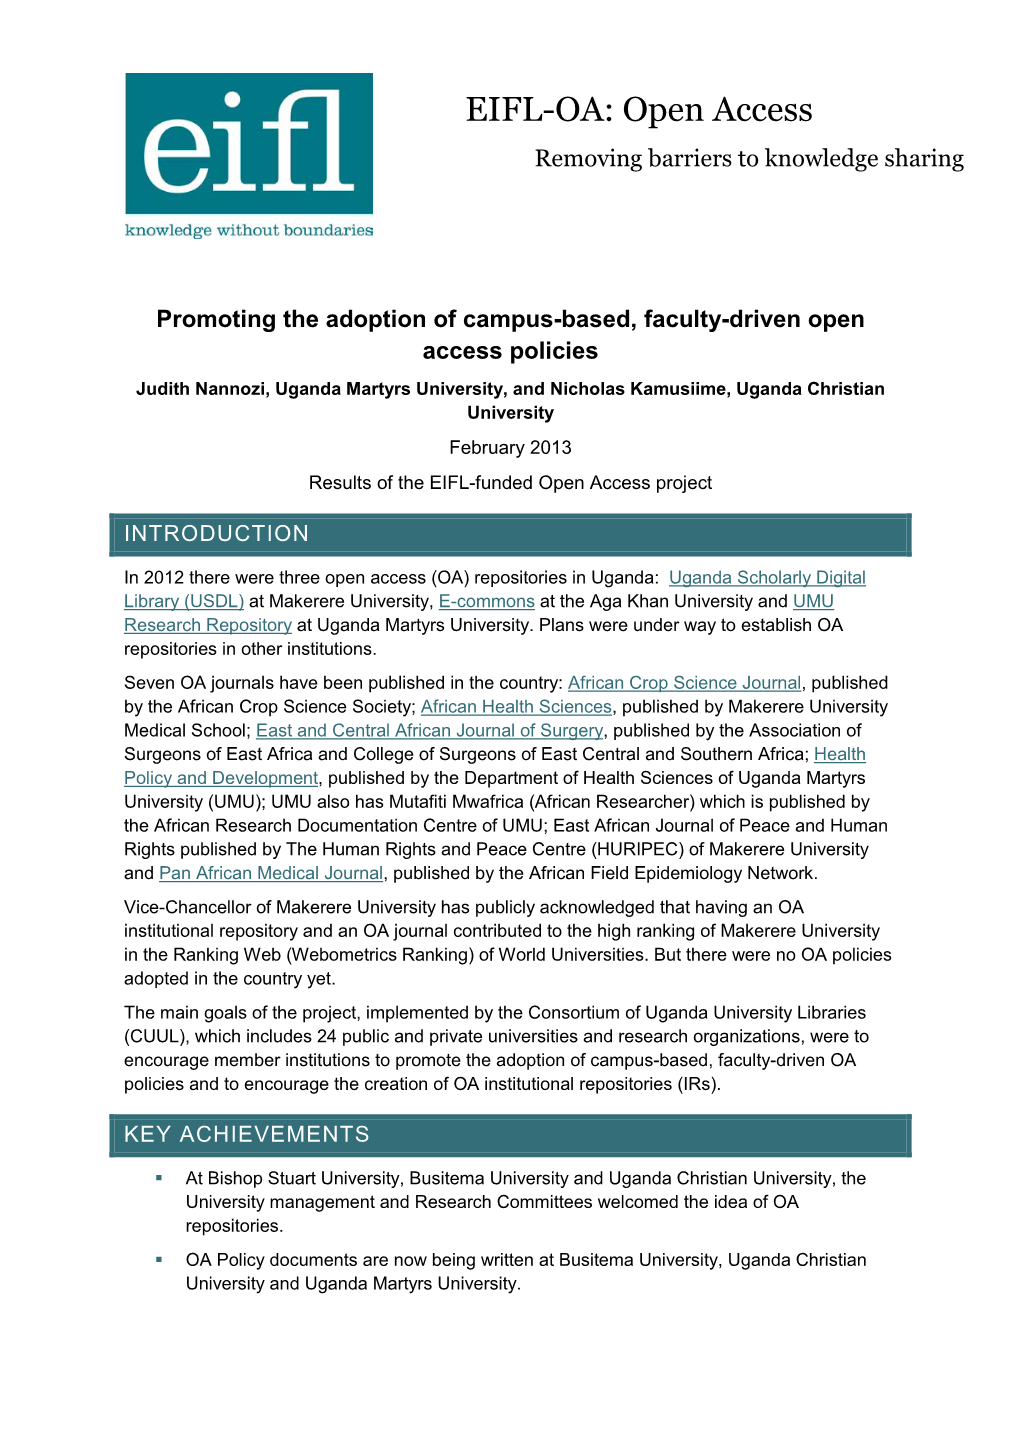 EIFL-OA: Open Access Removing Barriers to Knowledge Sharing